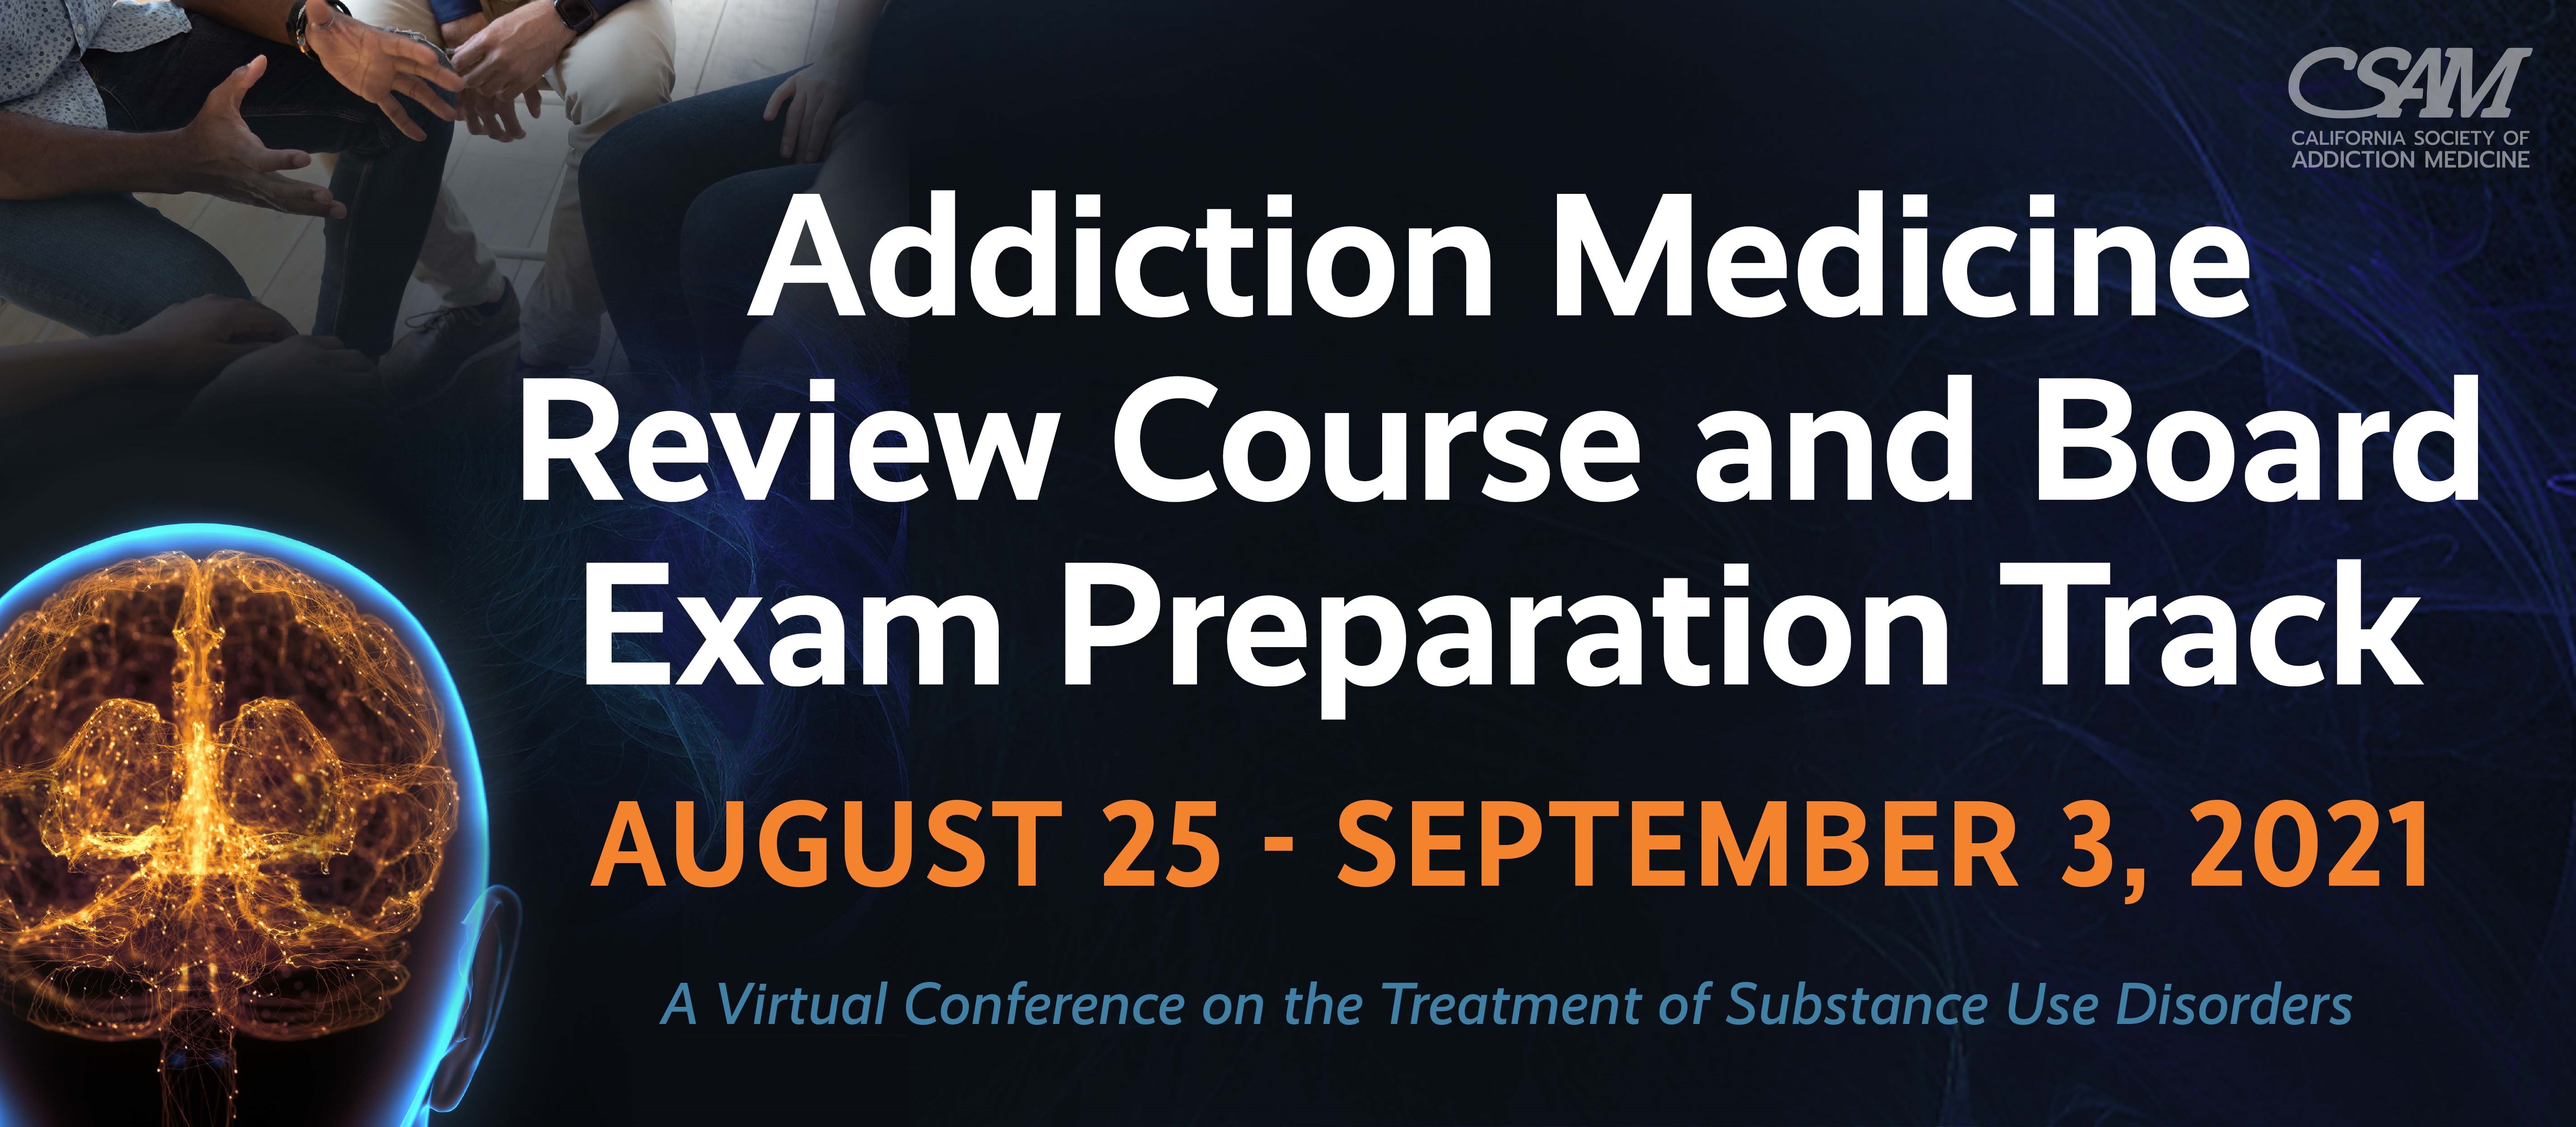 Review Course in Addiction Medicine (2021)